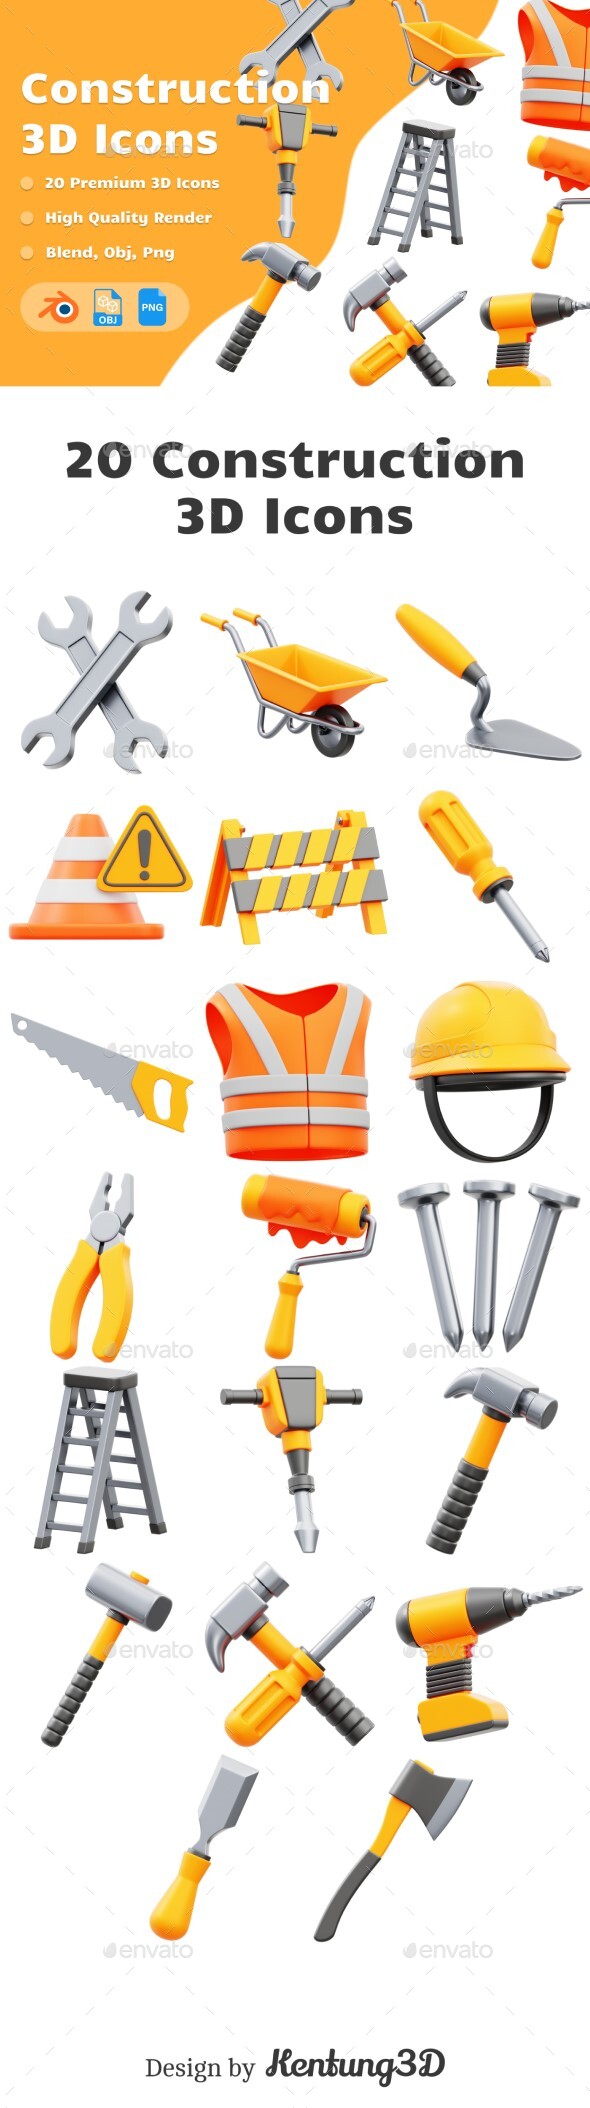 Construction Tool 3D Icons Set